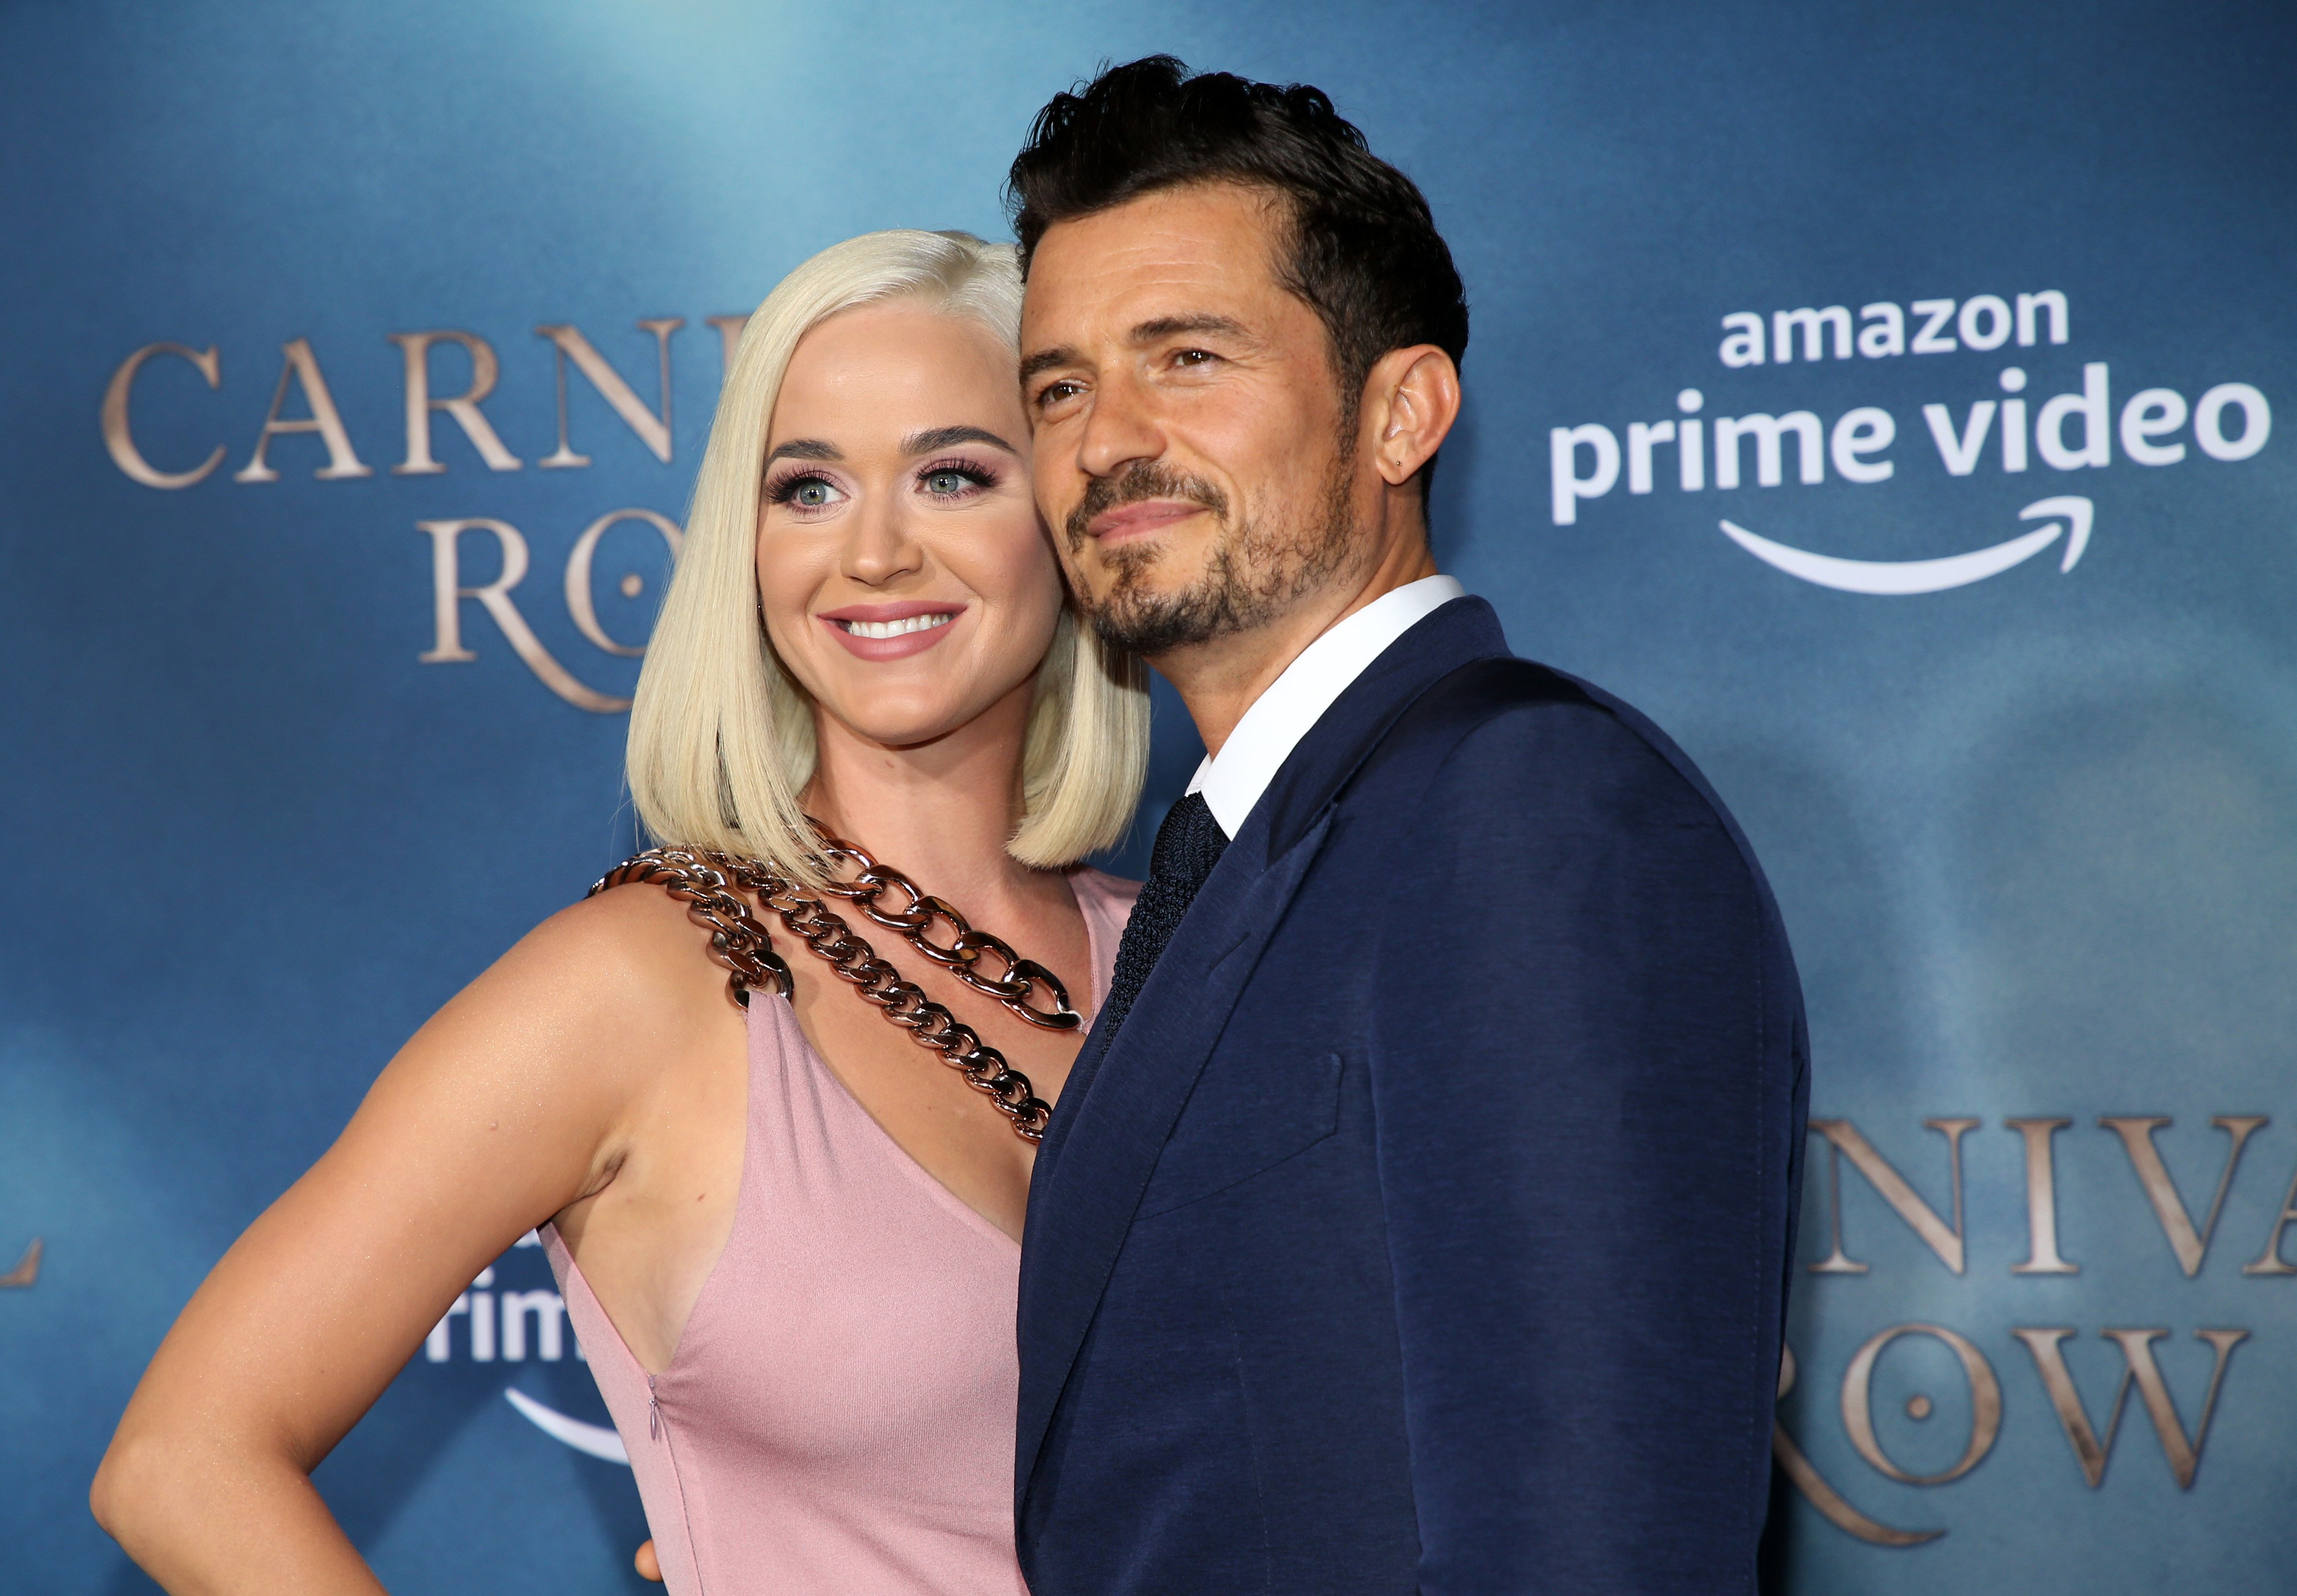 Katy Perry and Orlando Bloom attend the LA premiere of Amazon's "Carnival Row" at TCL Chinese Theatre on August 21, 2019, in Hollywood, California. | Source: Getty Images.